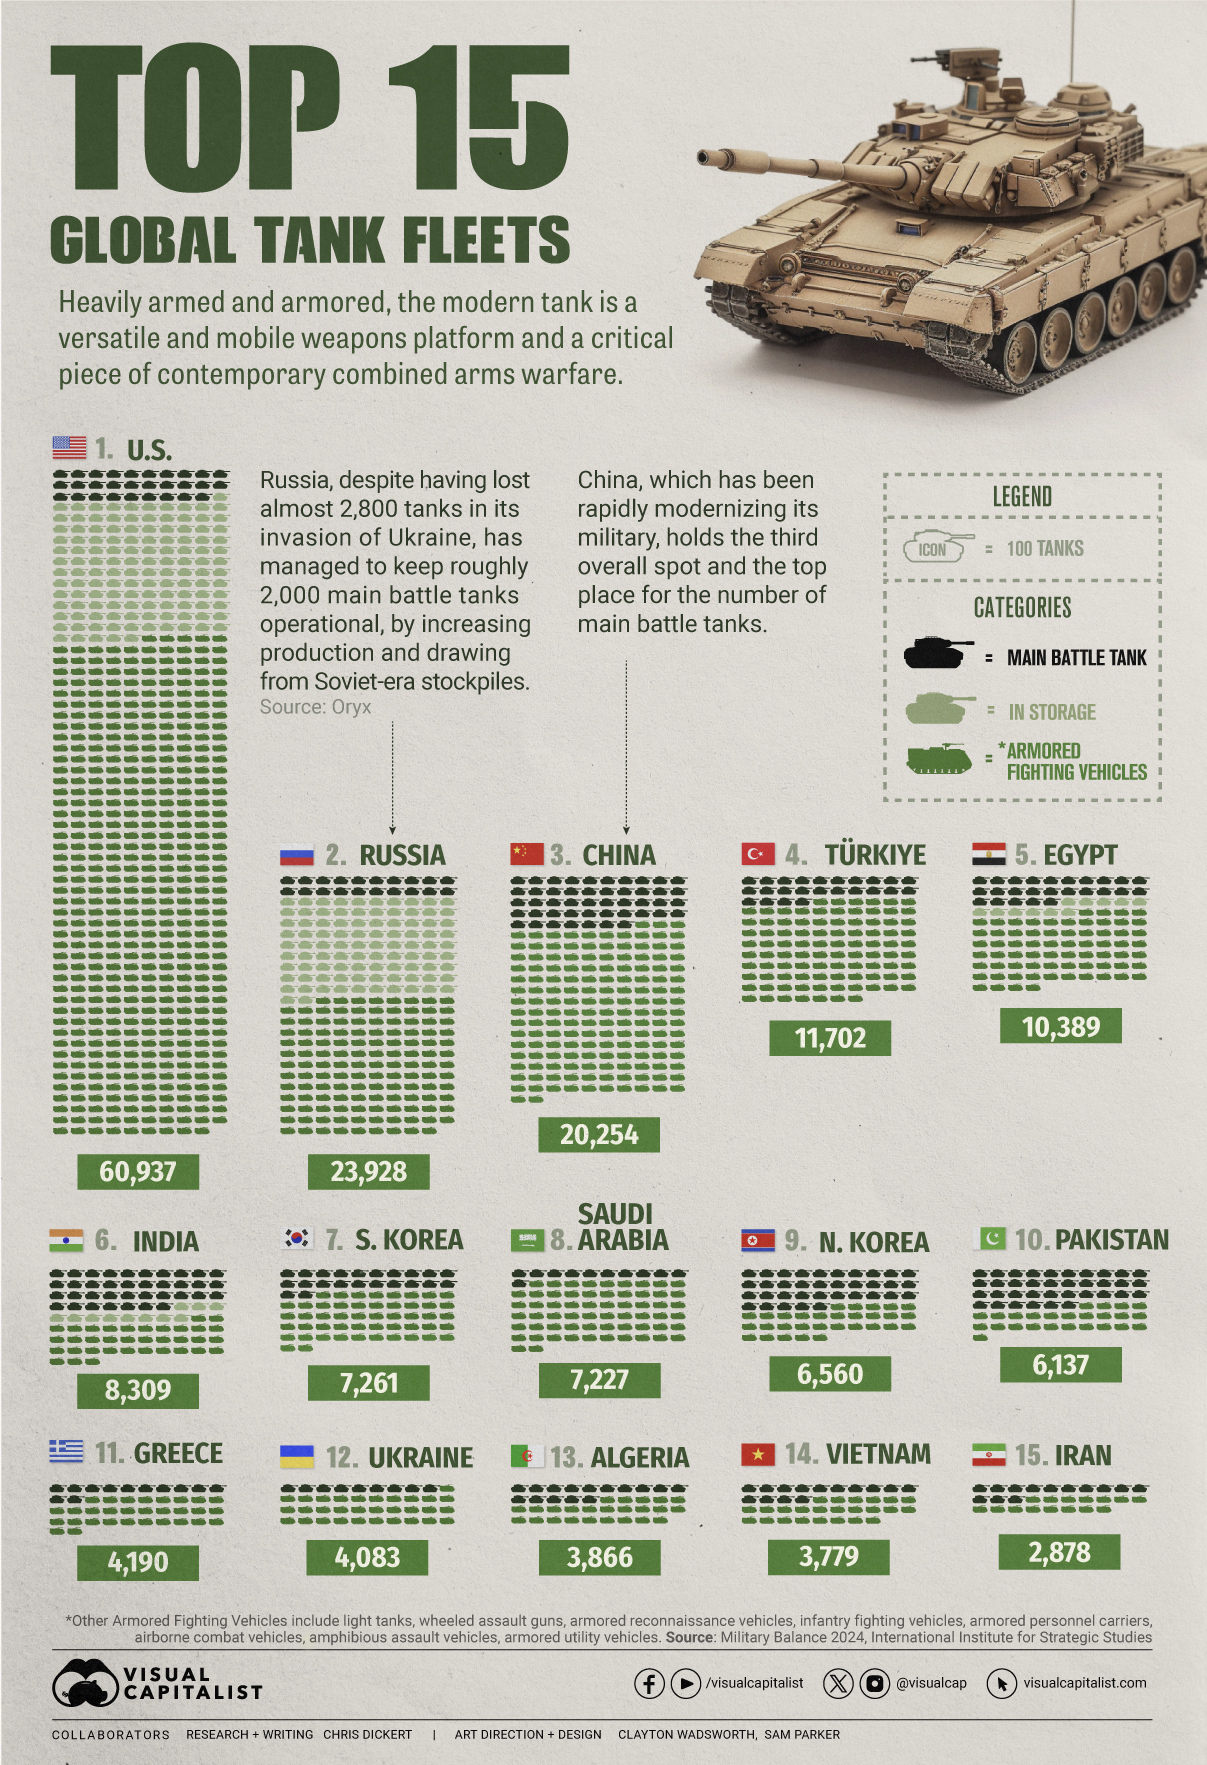 Dot matrix chart of the top 15 global tank fleets, broken down by main battle tanks, armored fighting vehicles, and storage, showing that the U.S. is number one, by a wide margin.